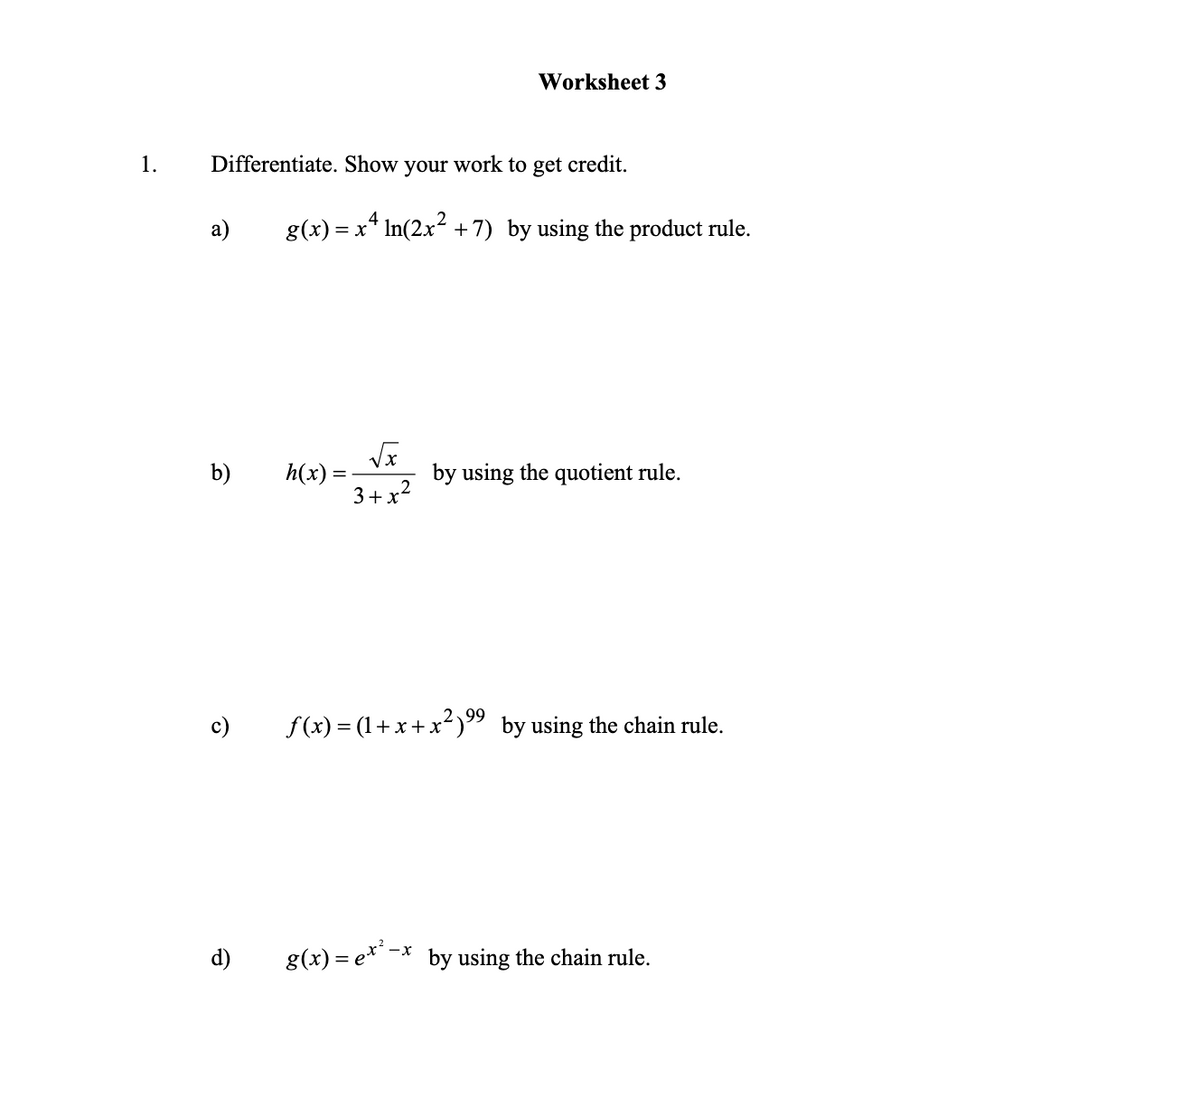 Worksheet 3
1.
Differentiate. Show your work to get credit.
а)
g(x) = x* In(2x2 +7) by using the product rule.
b)
h(x) =
by using the quotient rule.
3+x?
2,99
c)
f(x) = (1+x+x²)" by using the chain rule.
d)
8(x) = e*'-;
by using the chain rule.
